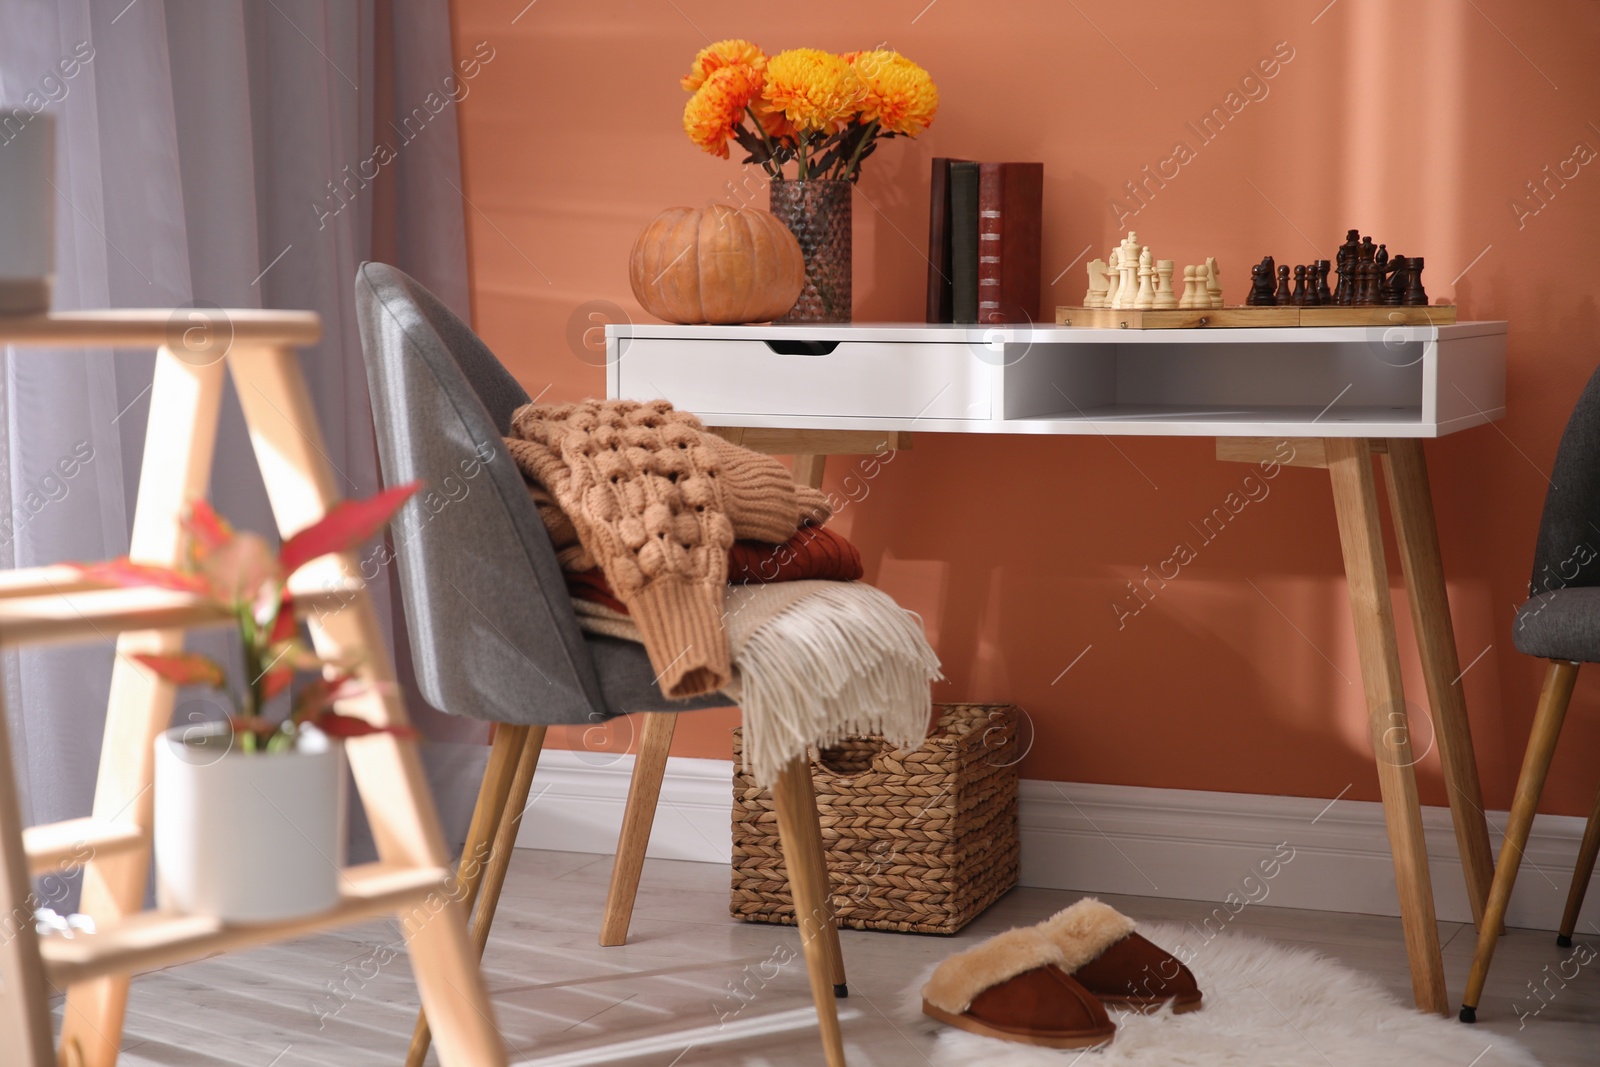 Photo of Cozy room interior inspired by autumn colors